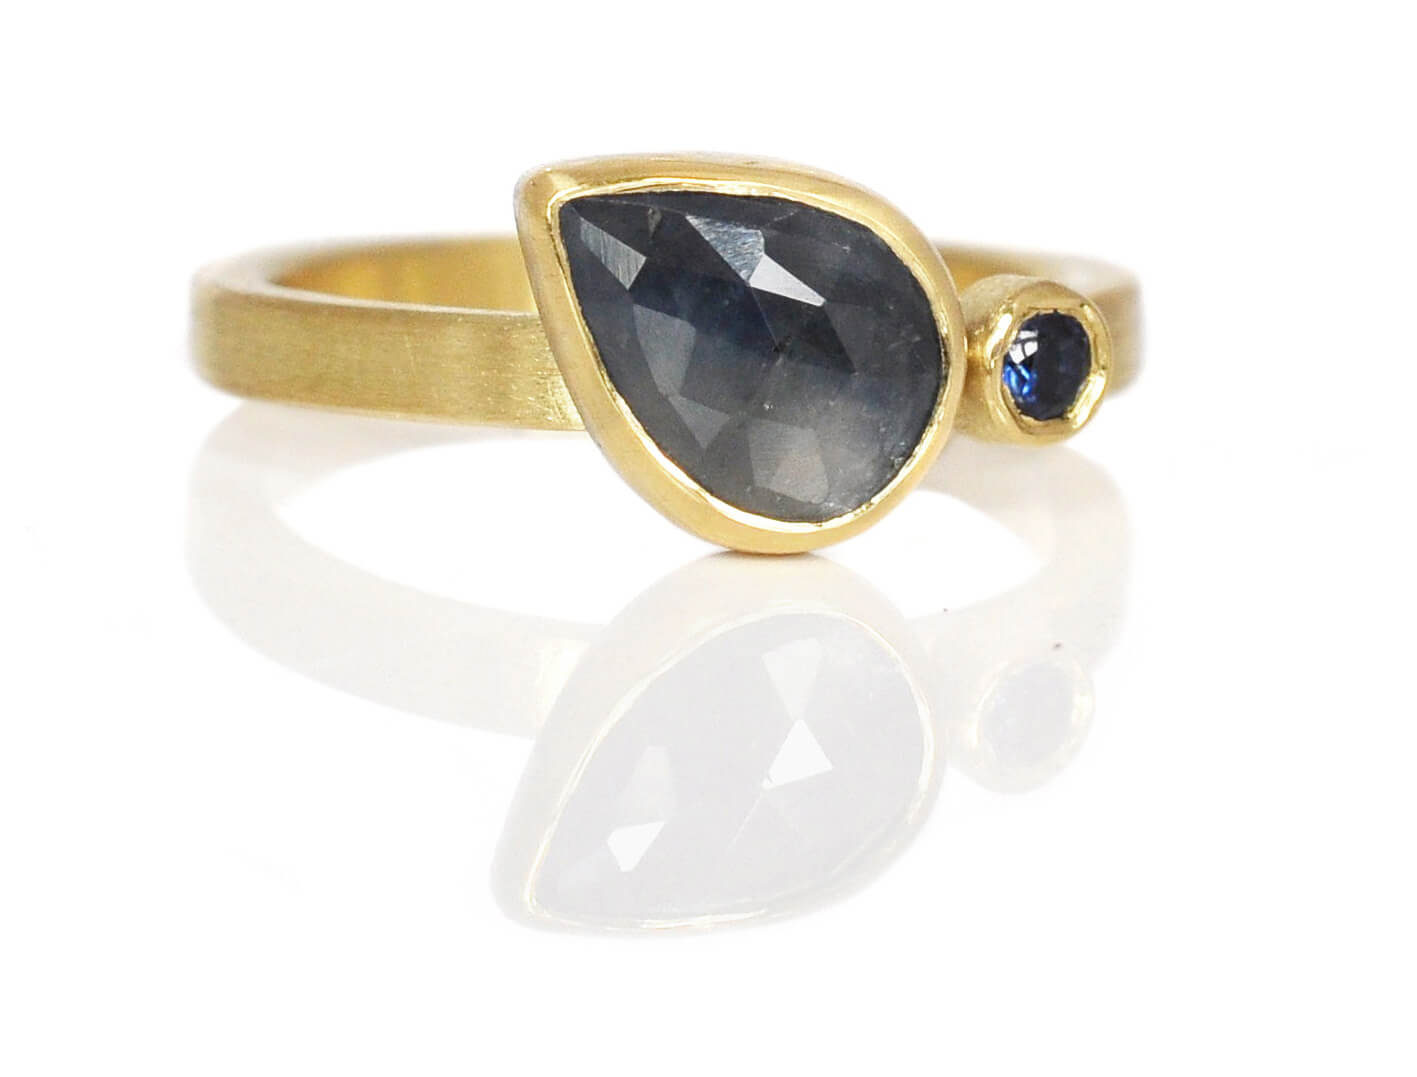 Rose cut sapphire engagement ring in yellow gold with a brilliant cut sapphire accent stone.